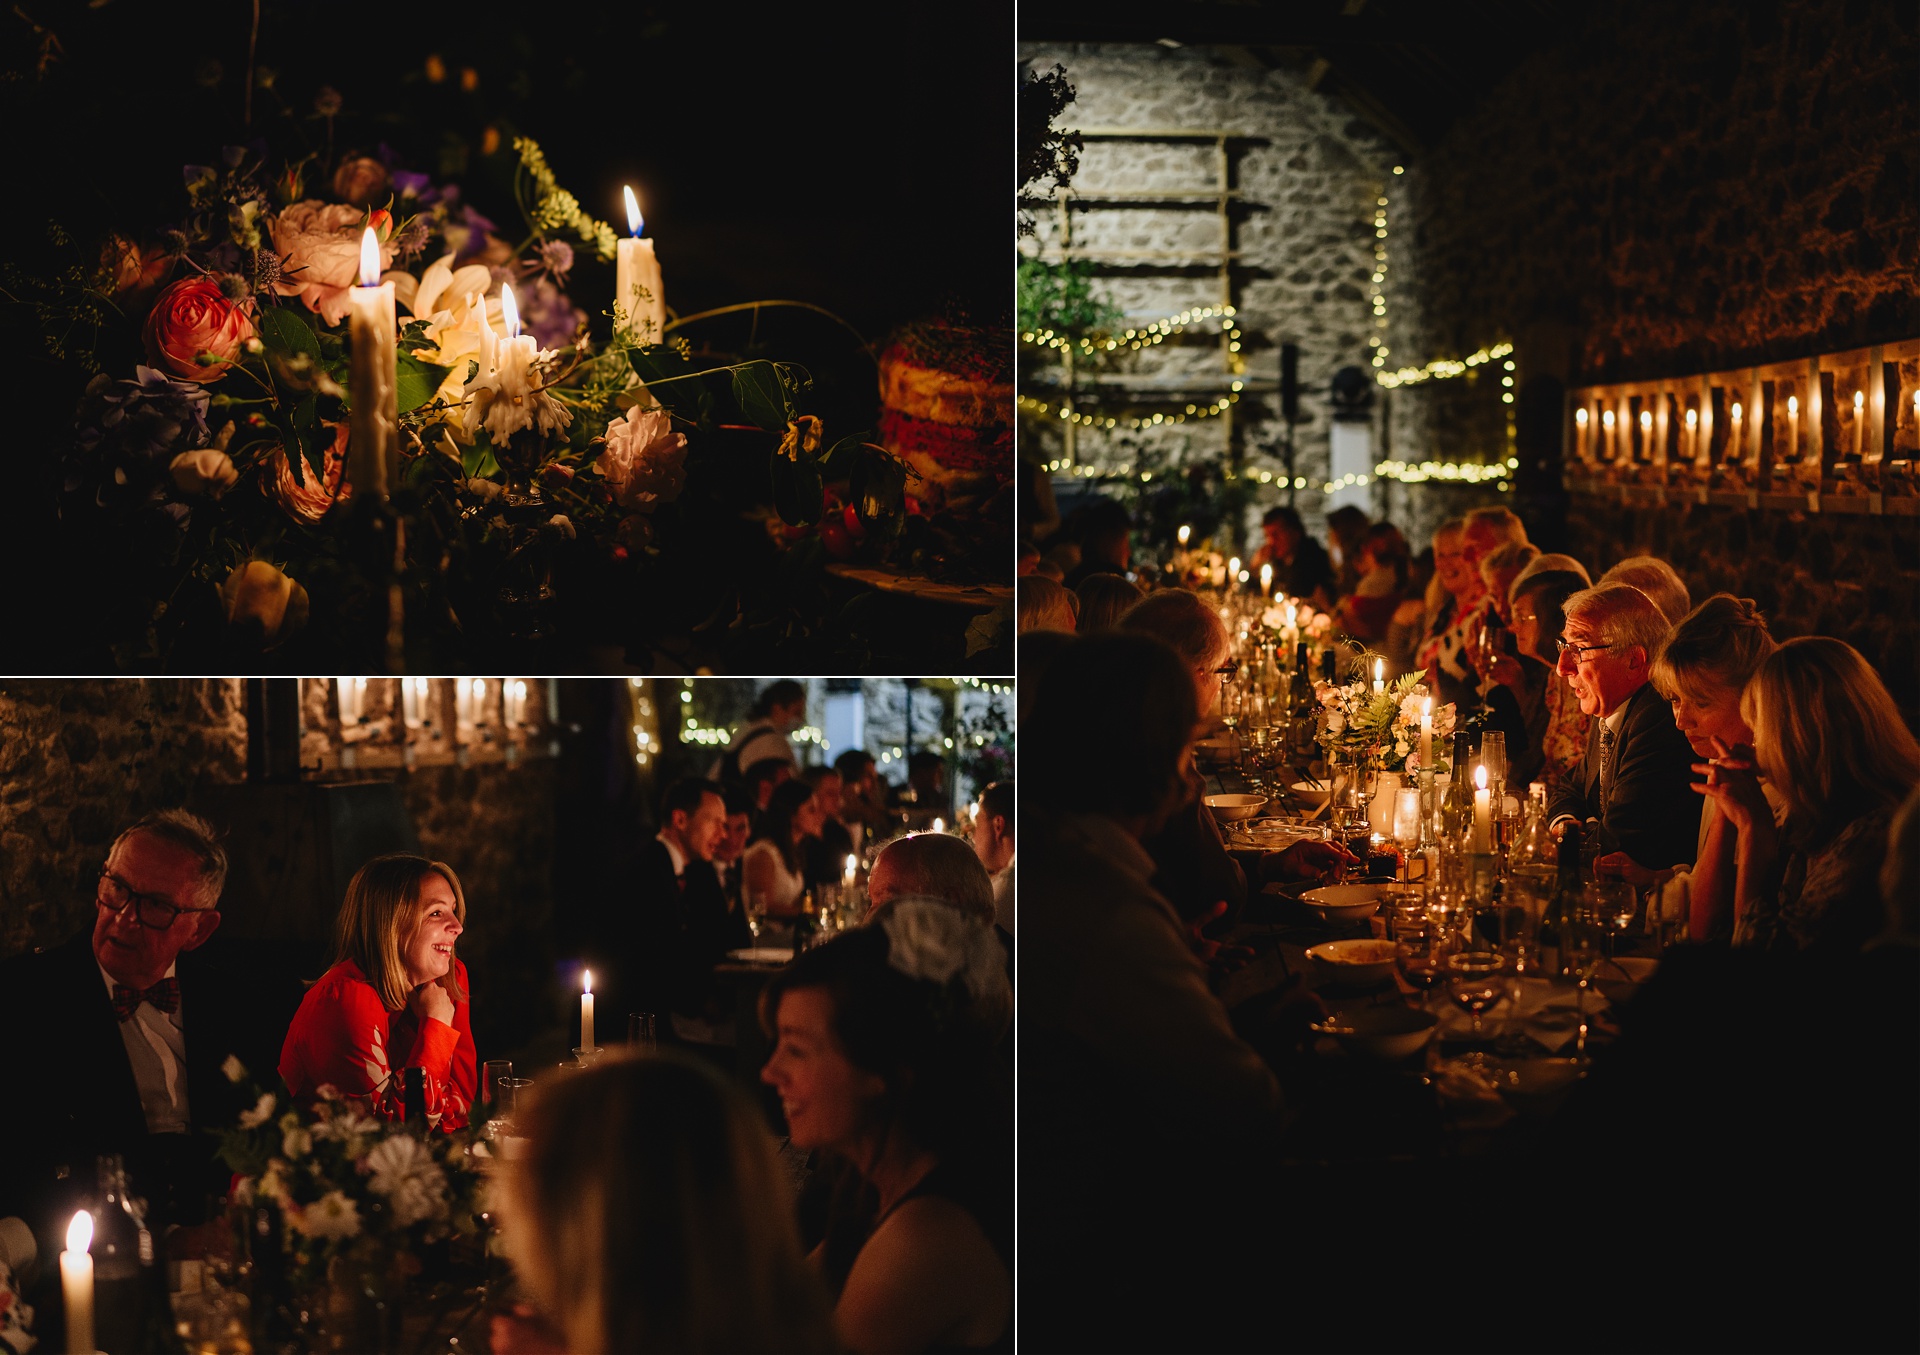 Wedding guests chatting around tables in dark ambience with candles lit in a wow factor barn wedding